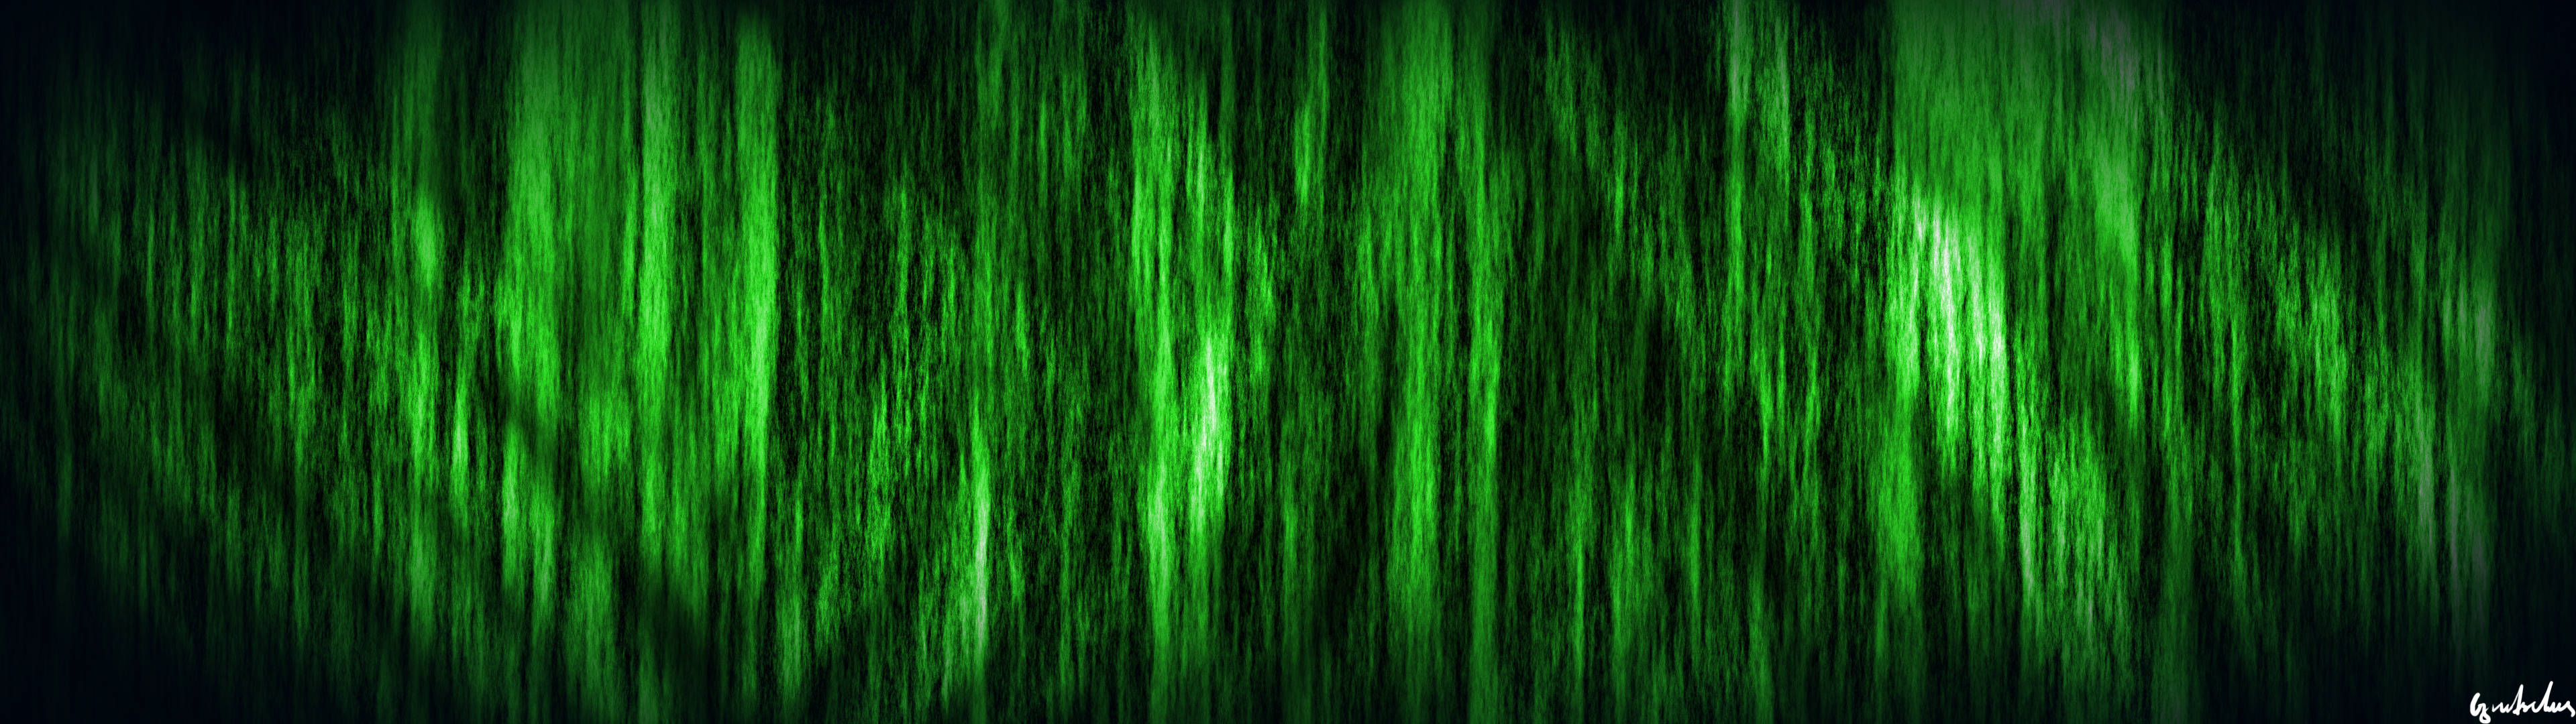 Black And Green Fuzzy Background Wallpaper